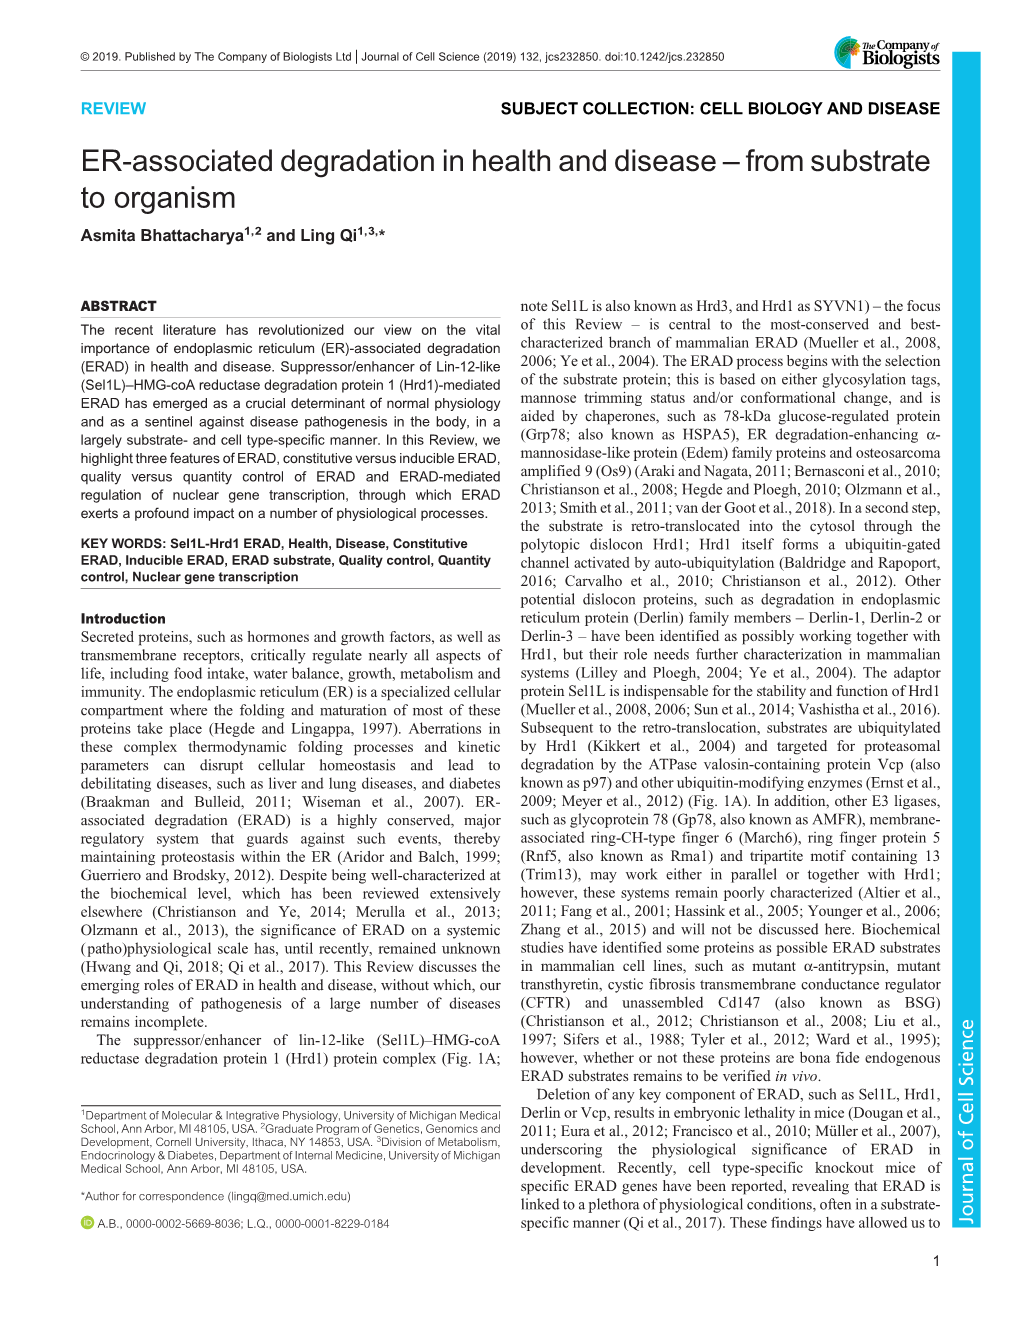 ER-Associated Degradation in Health and Disease – from Substrate to Organism Asmita Bhattacharya1,2 and Ling Qi1,3,*